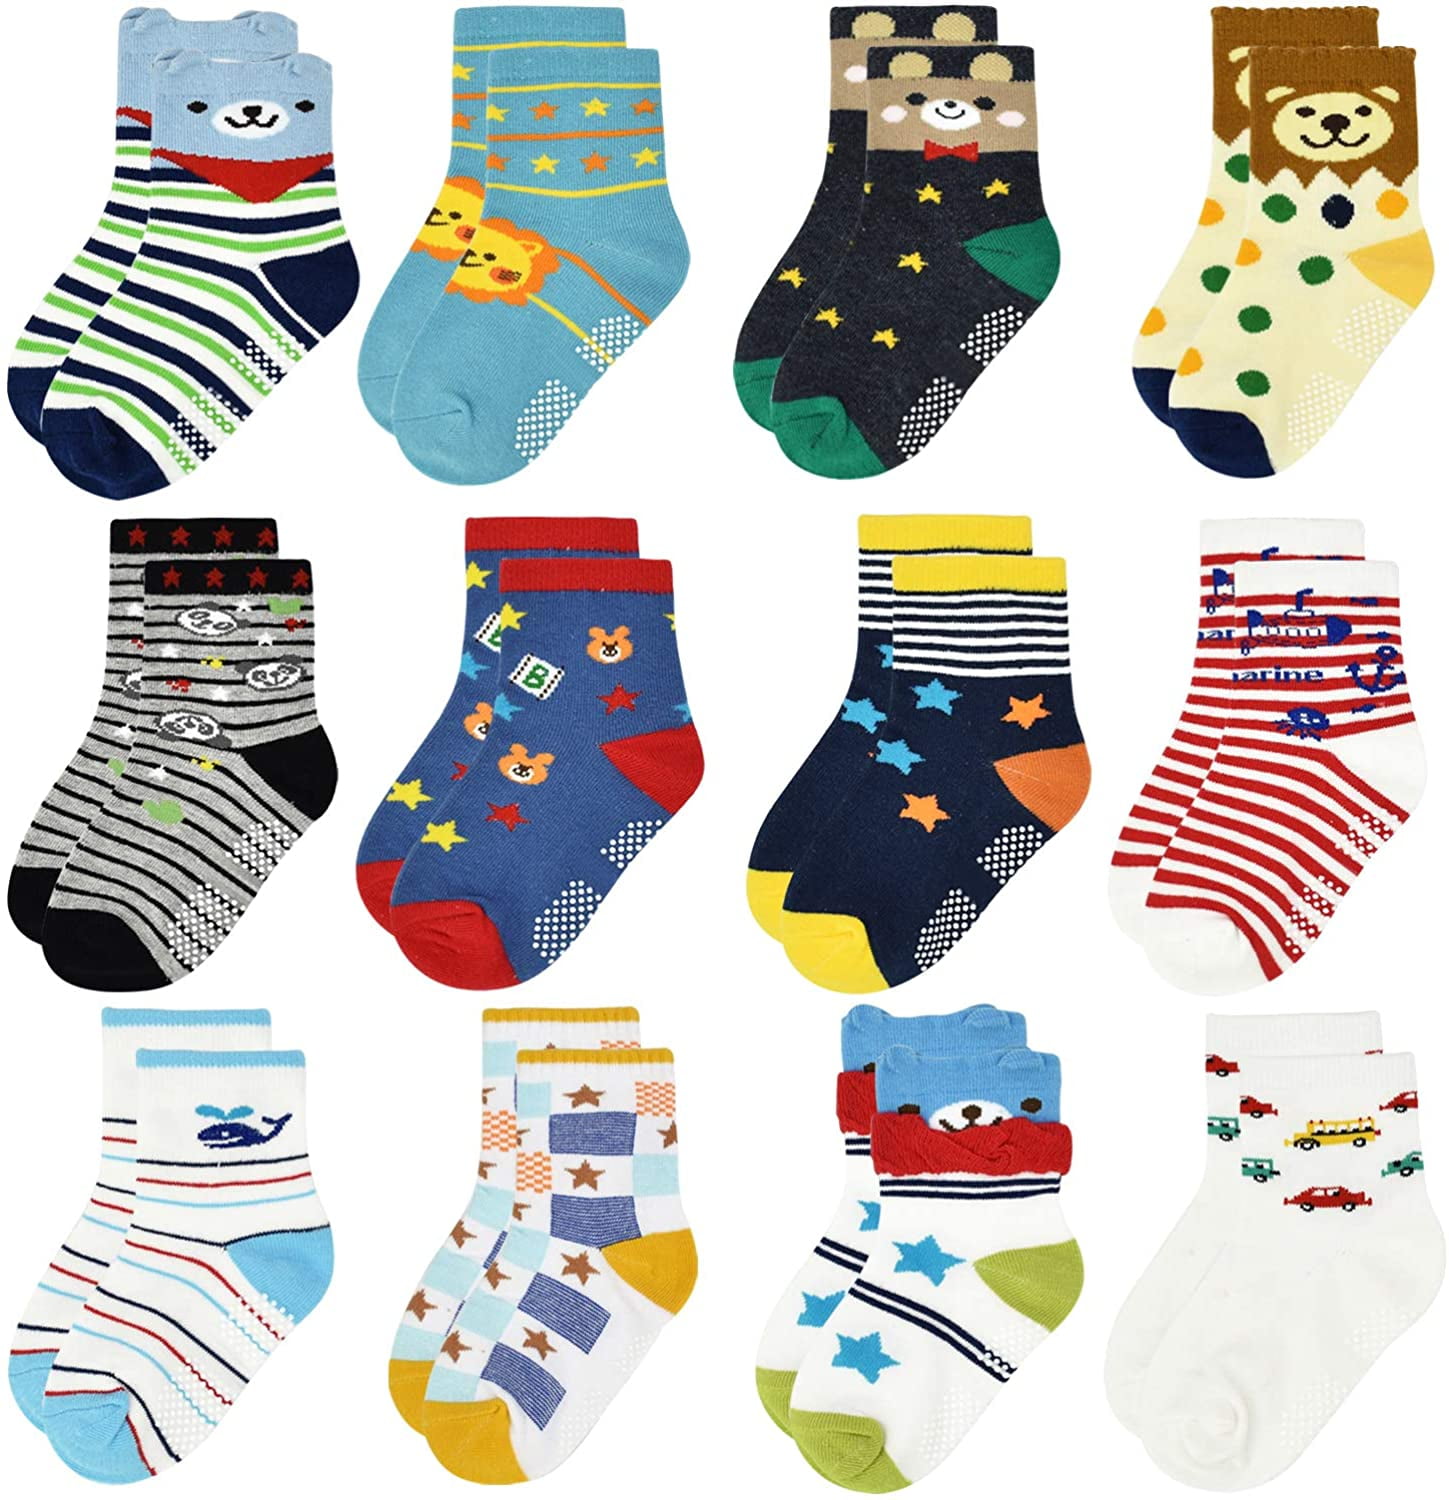 Non Skid Anti Slip Crew Cotton Socks With Grips For Baby Toddlers Boys 